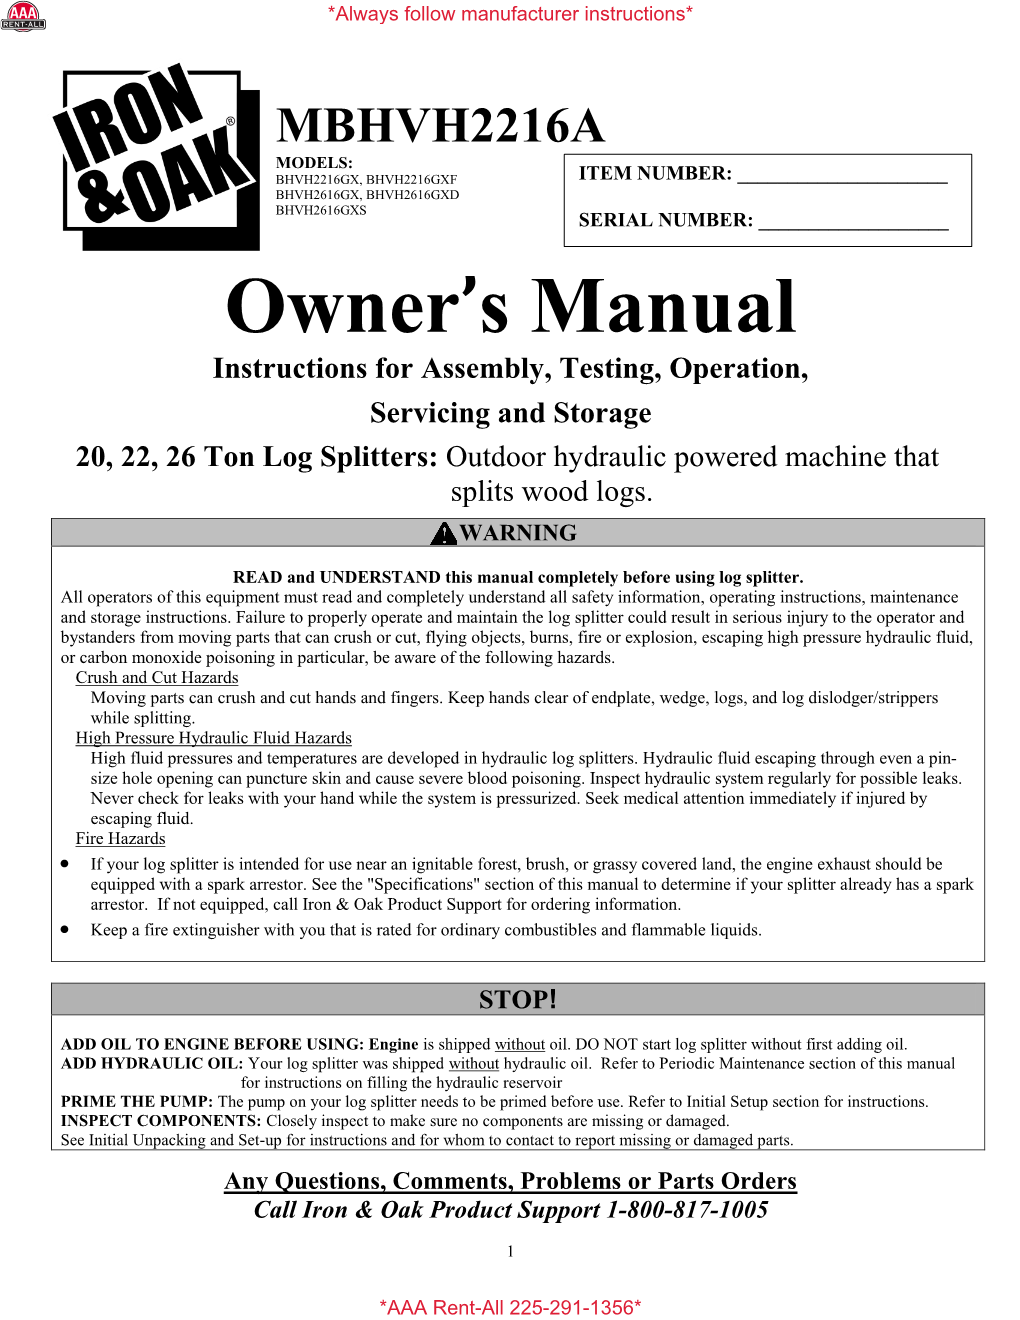 Owner's Manual with the Splitter at All Times and Advise All Persons Who Will Operate the Machine to Read It